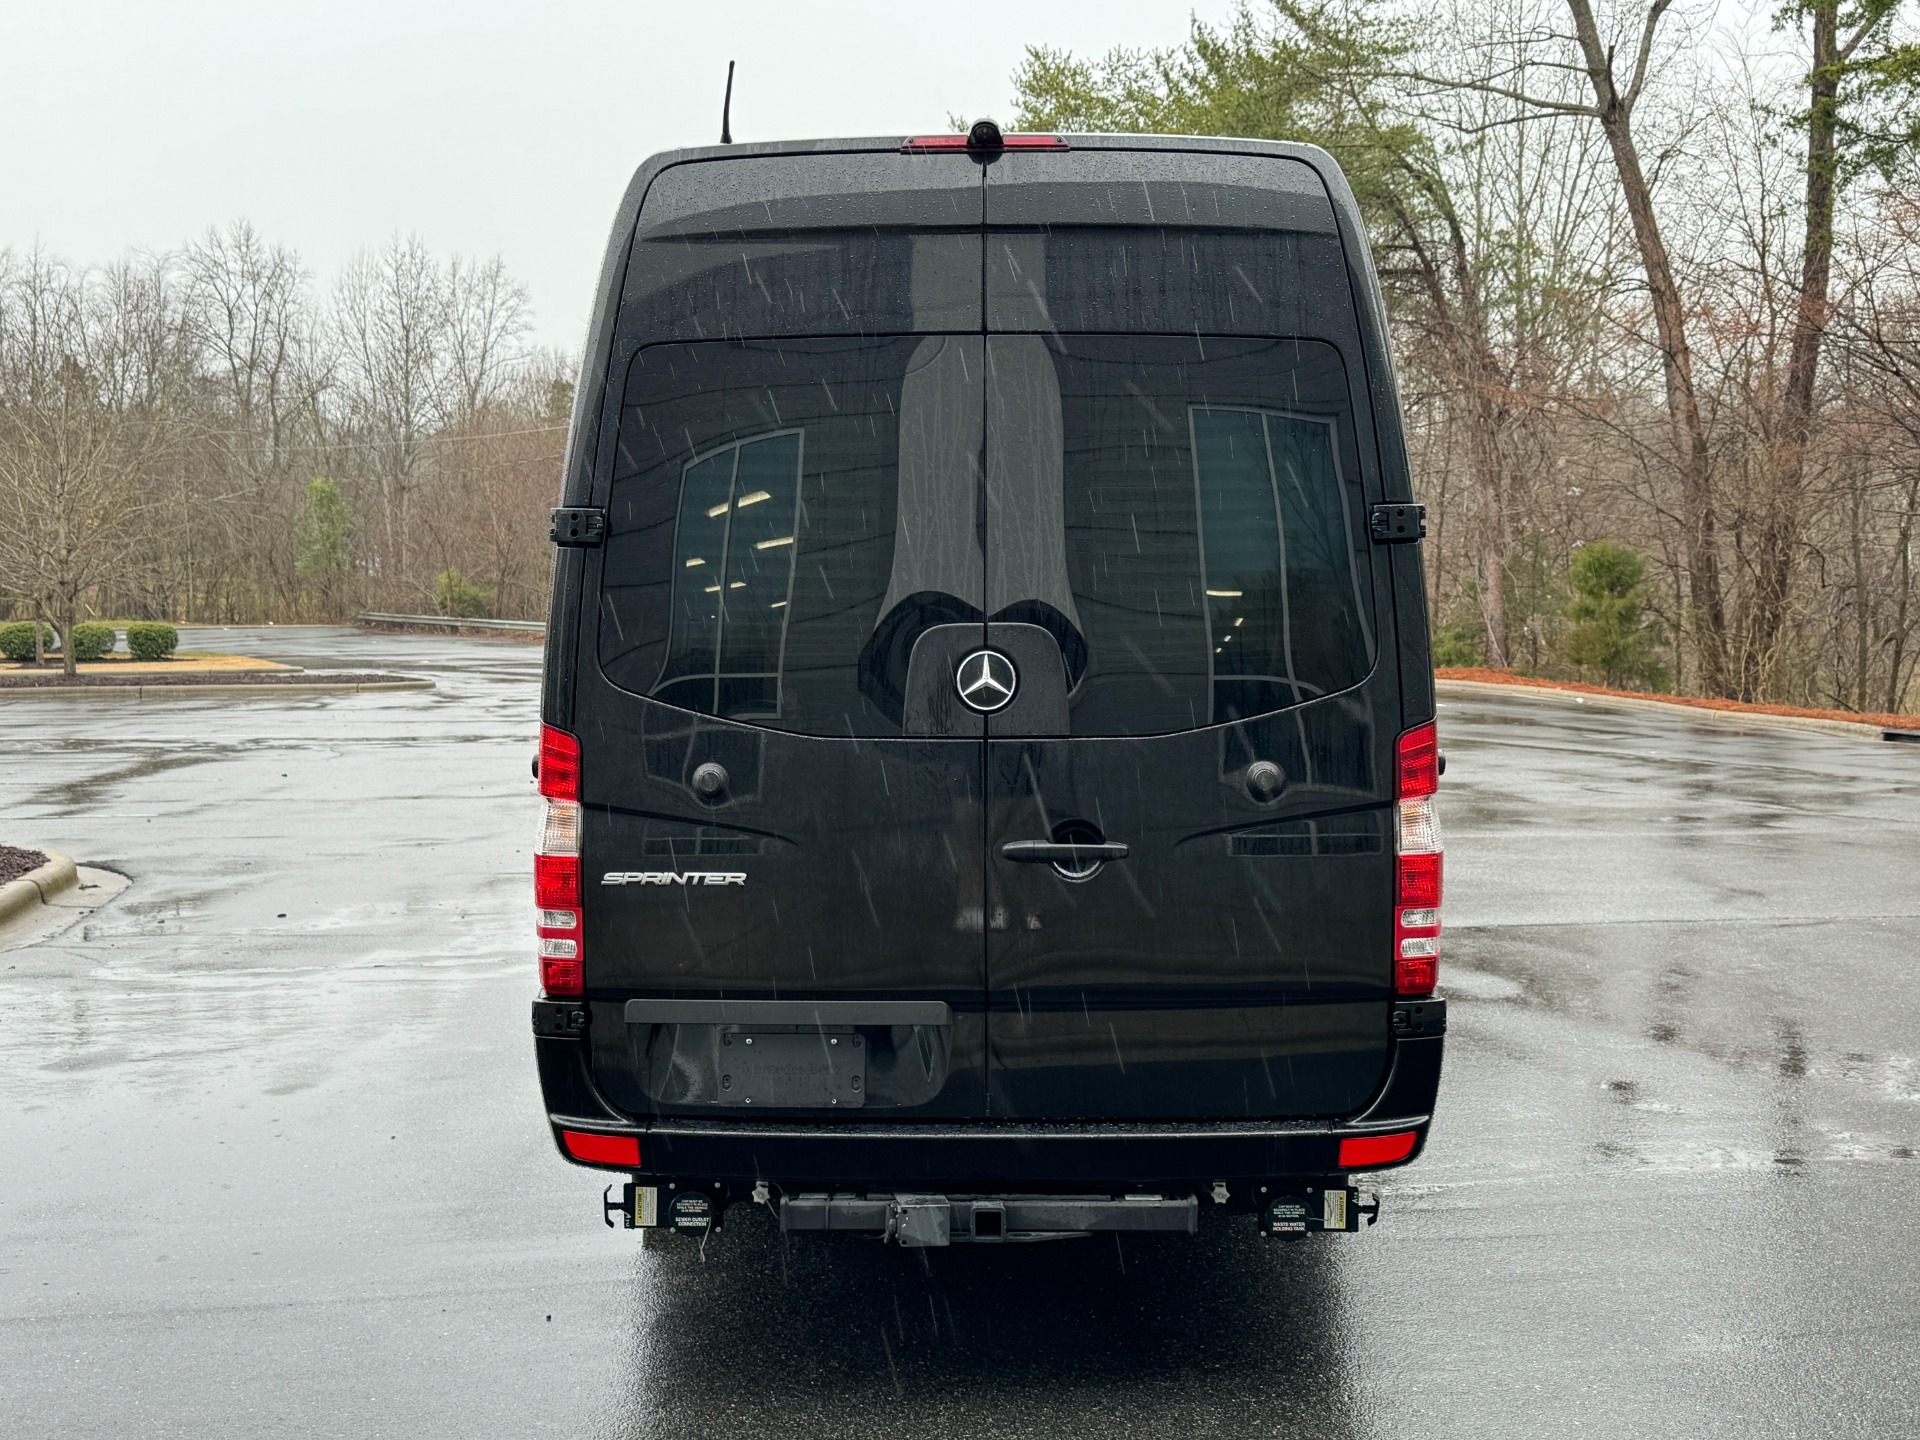 Used 2017 Mercedes-Benz Sprinter Cargo Van MIDWEST JET VAN CONVERSION for sale $120,000 at Formula Imports in Charlotte NC 28227 8